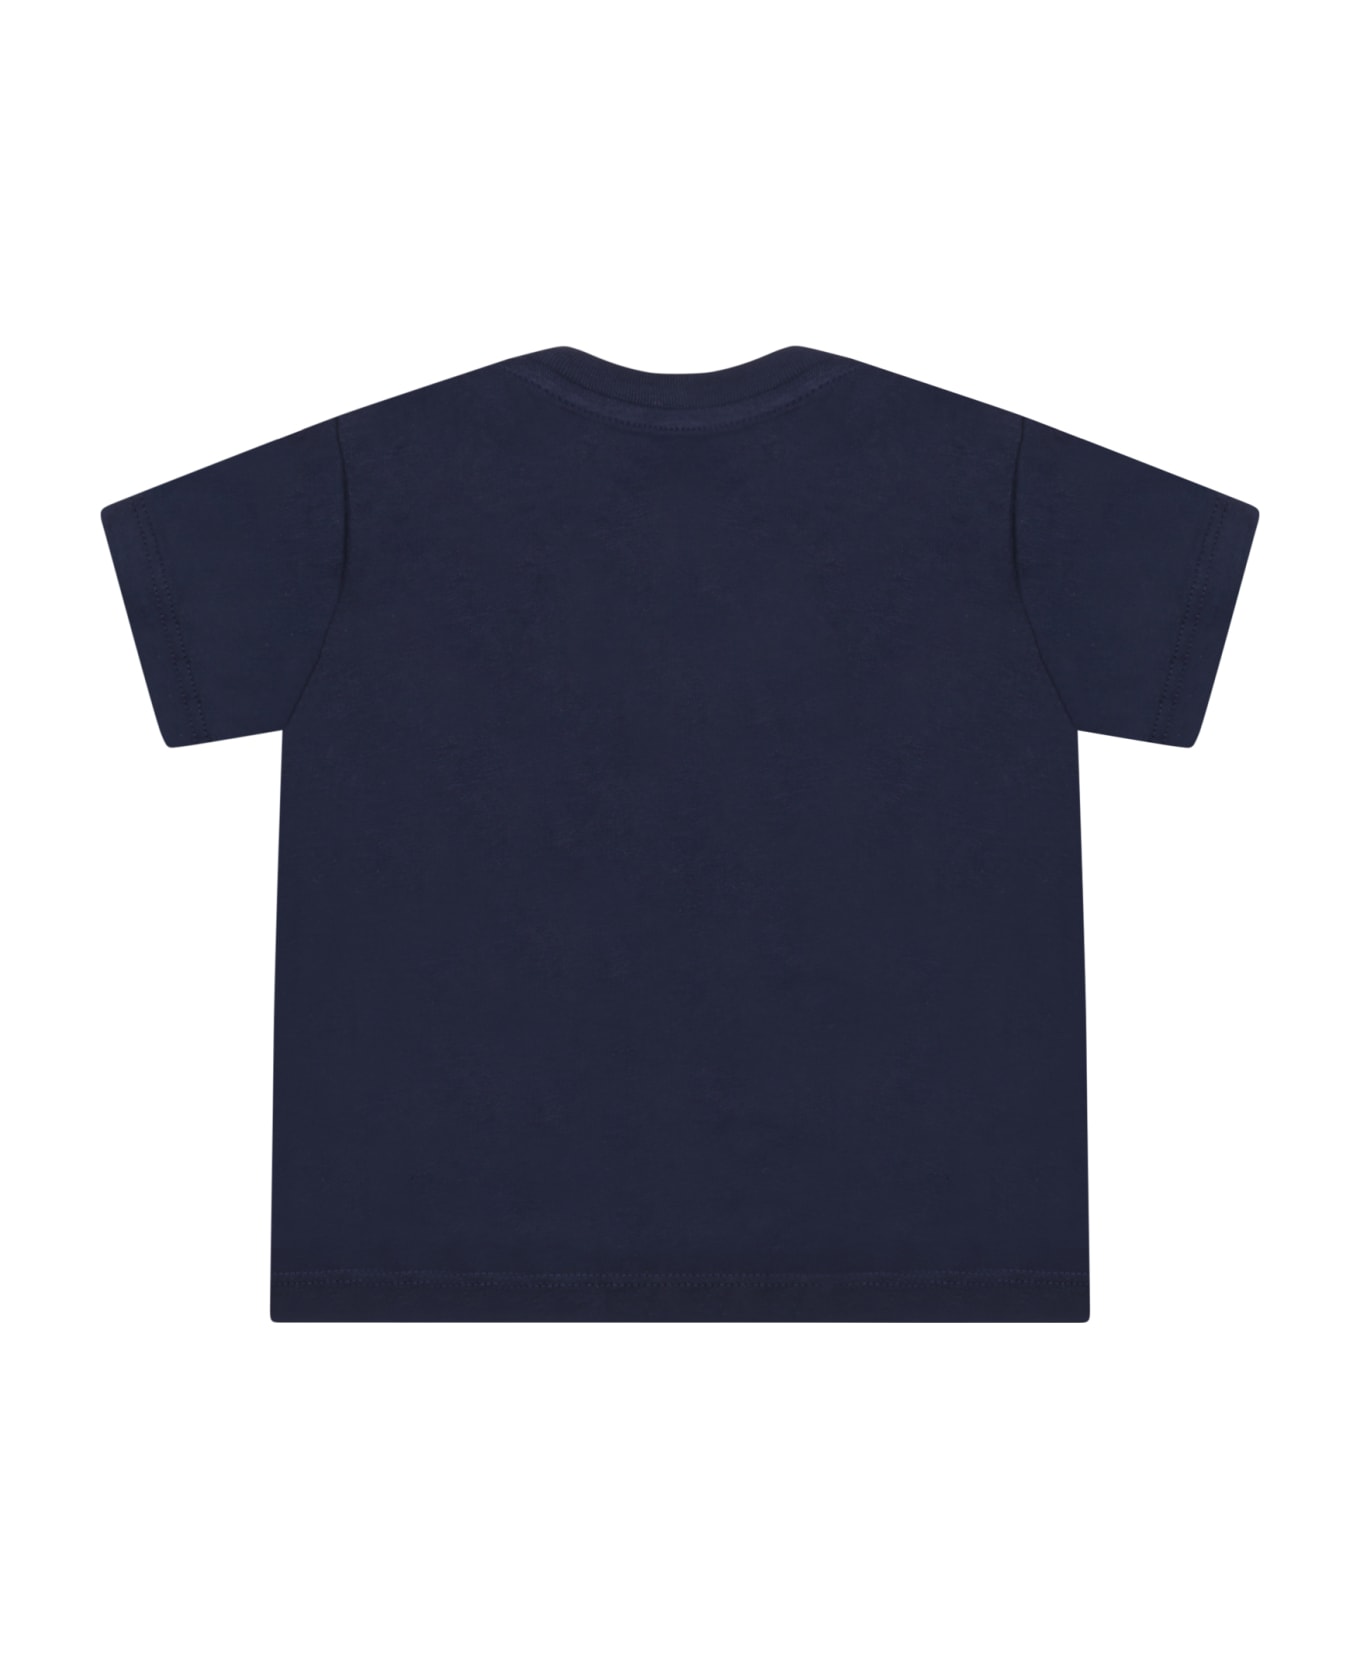 Ralph Lauren Blue T-shirt For Baby Kids With Iconic Pony Logo - Blue